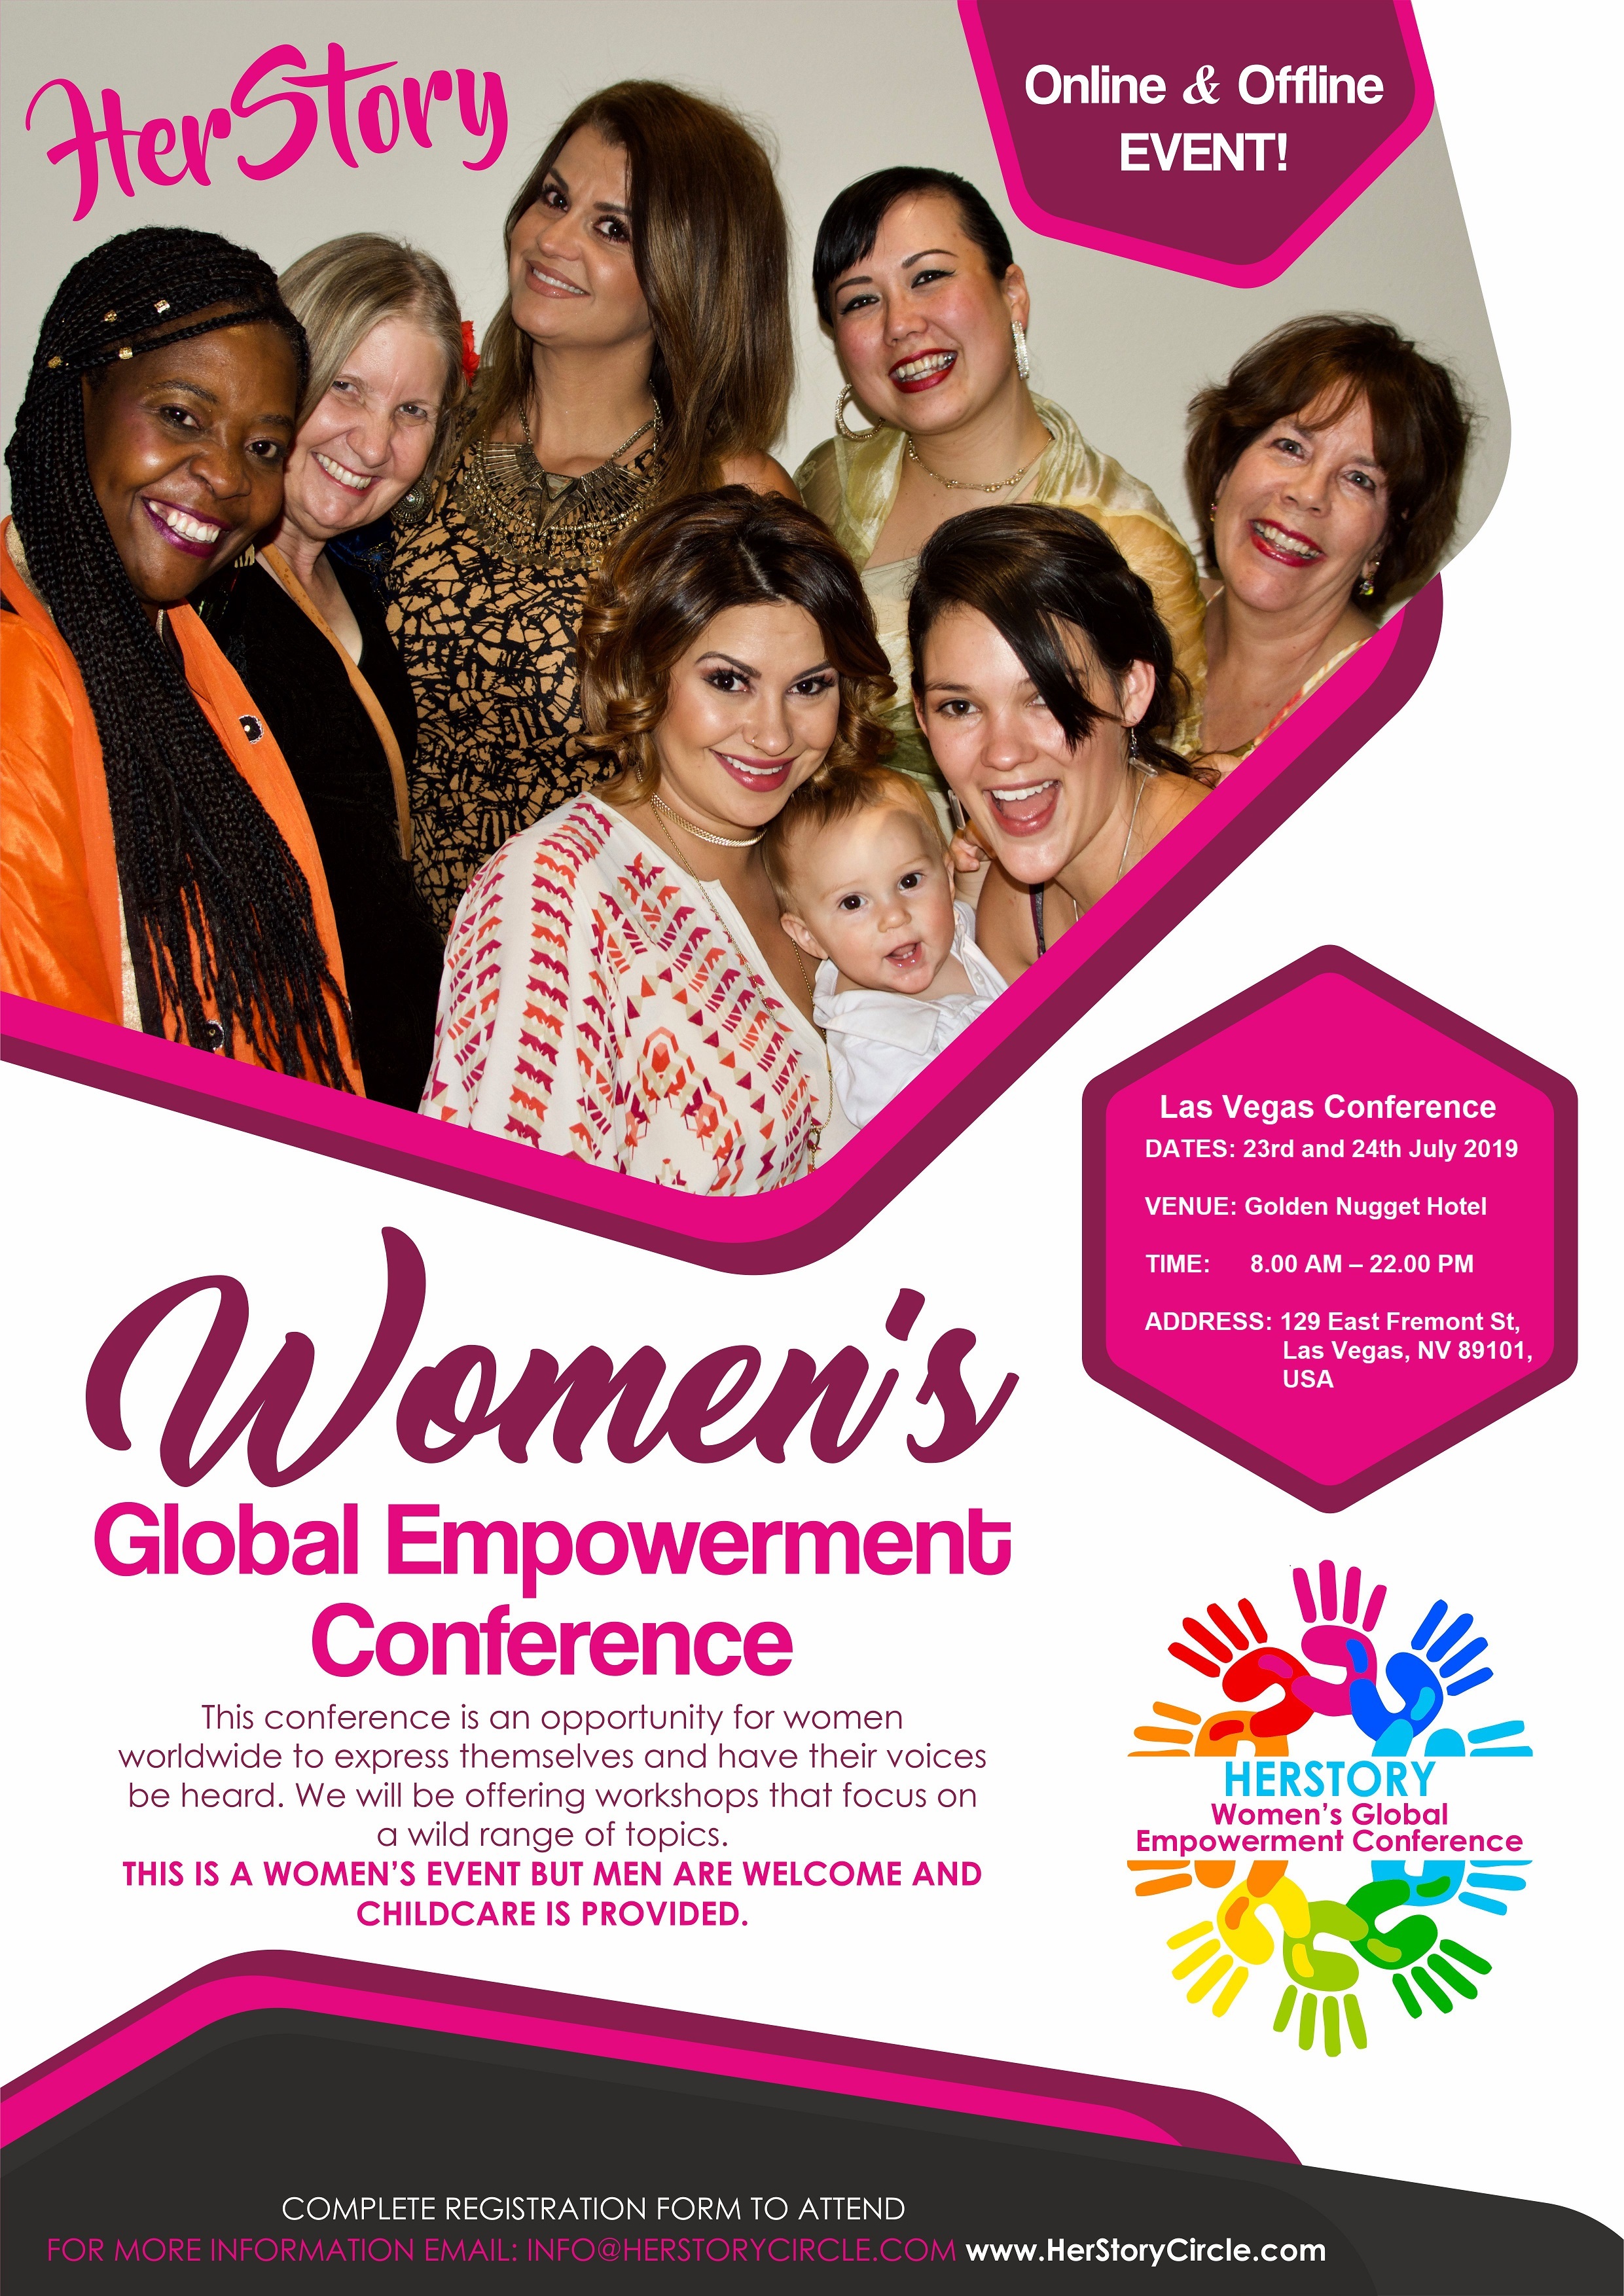 Herstory Women’s Global Empowerment Inaugural Conference is Launching in Las Vegas, USA